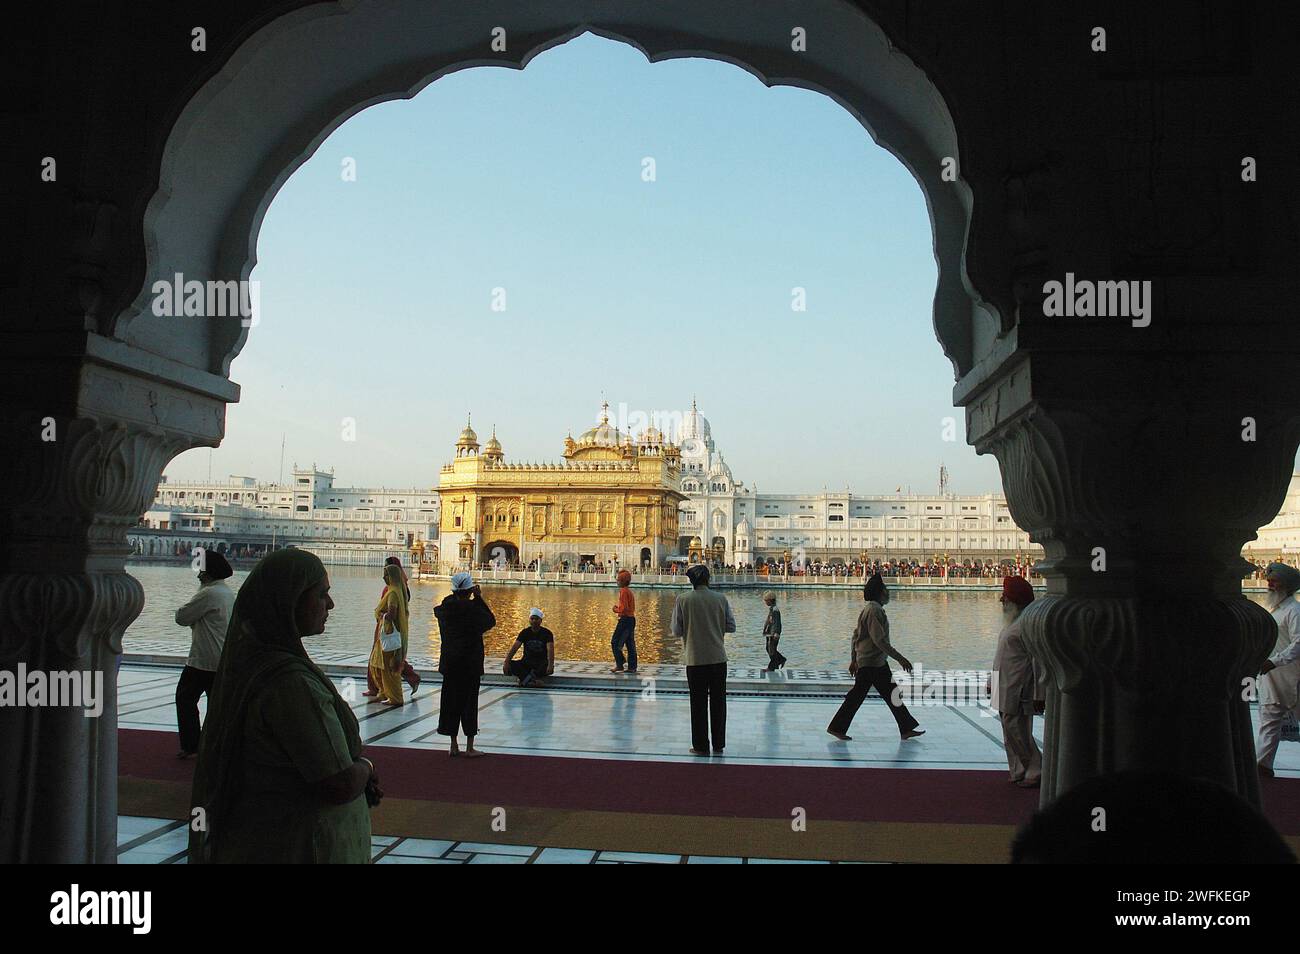 The Harmandir Sahib (or Hari Mandir) in Amritsar, Punjab, is the holiest shrine in Sikhism. Known as the Golden Temple, it was officially renamed Harmandir Sahib in March 2005. The temple (or gurdwara) is a major pilgrimage destination for Sikhs from all over the world, as well as an increasingly popular tourist attraction. The glorious temple is a living example of the spirit of tolerance and acceptance that the Sikh philosophy propounds. Amritsar, Punjab, India. Stock Photo